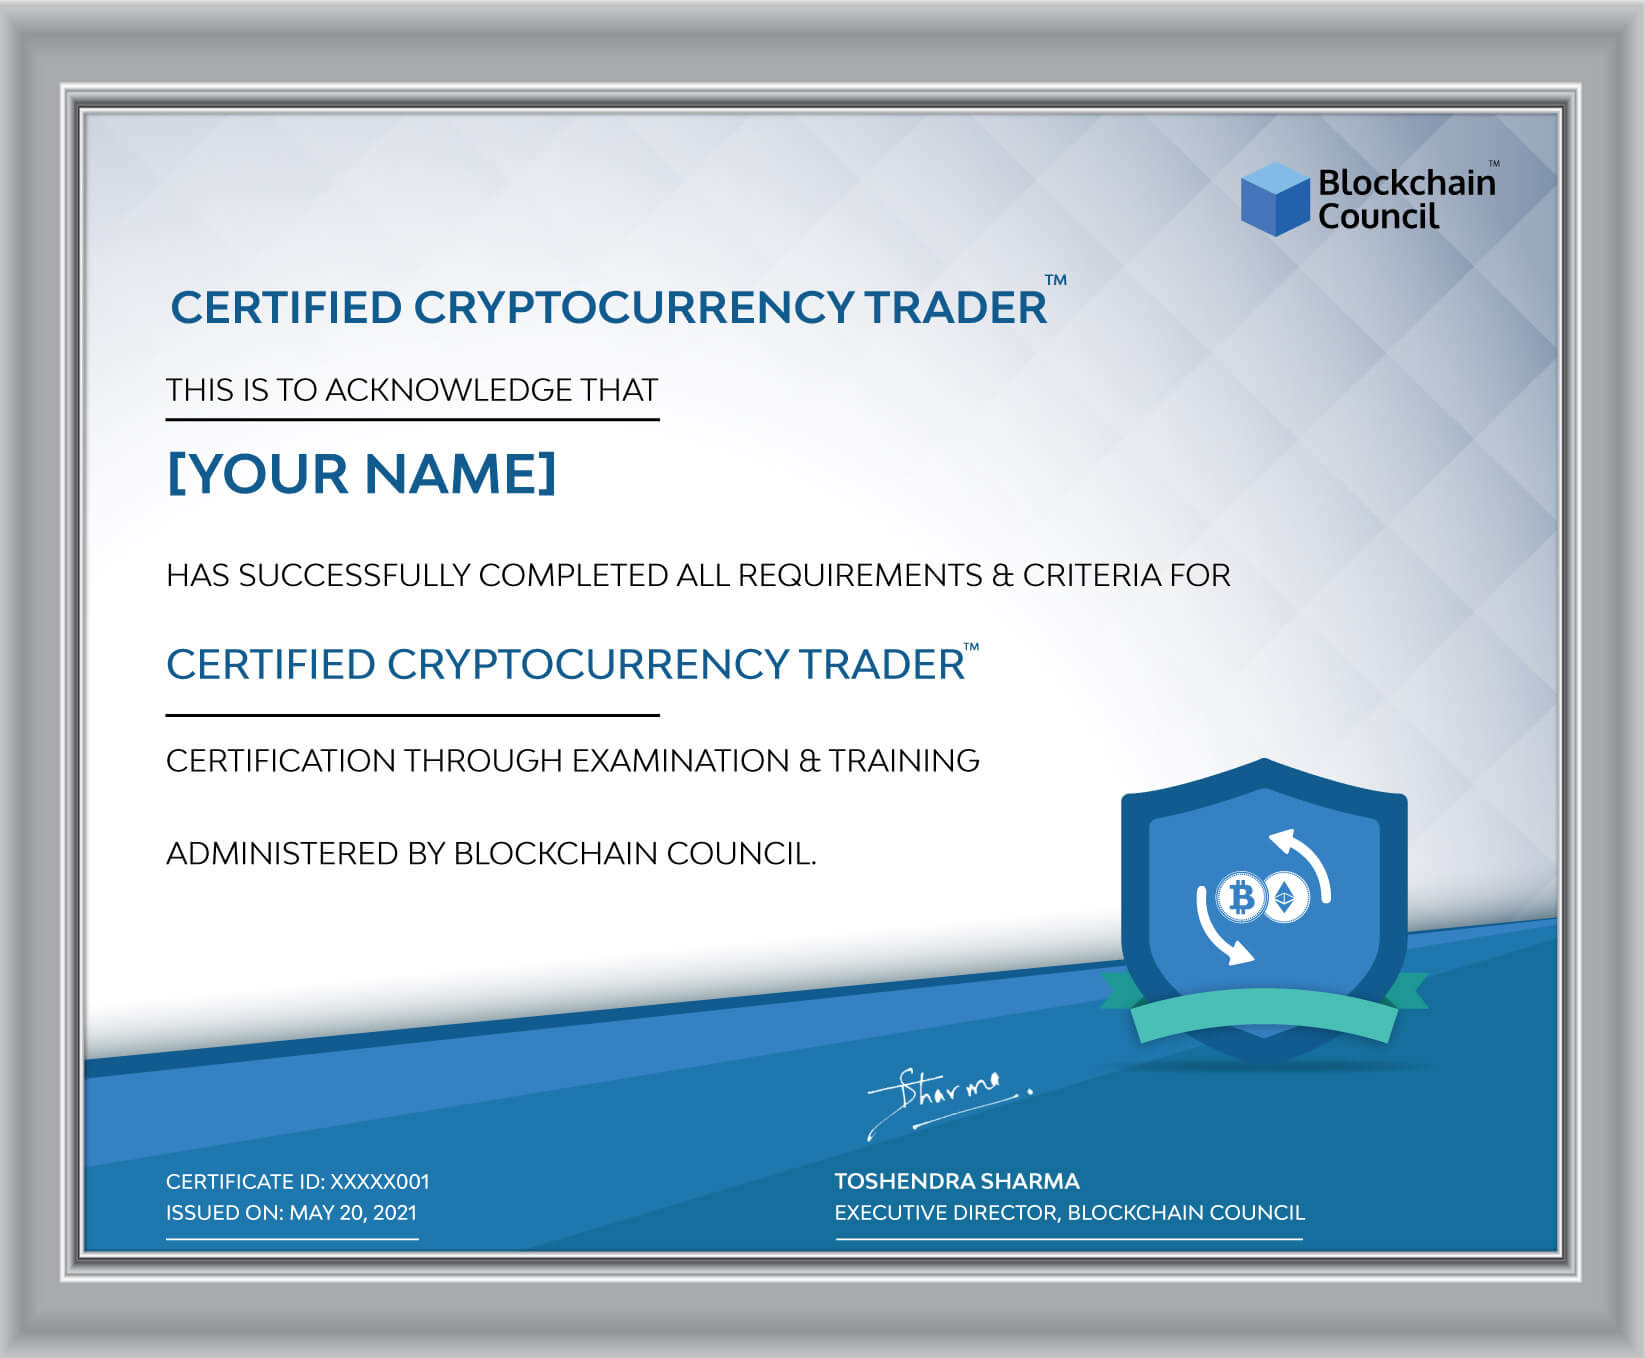 Certified-Cryptocurrency-Trader-certificate-Frame.jpg